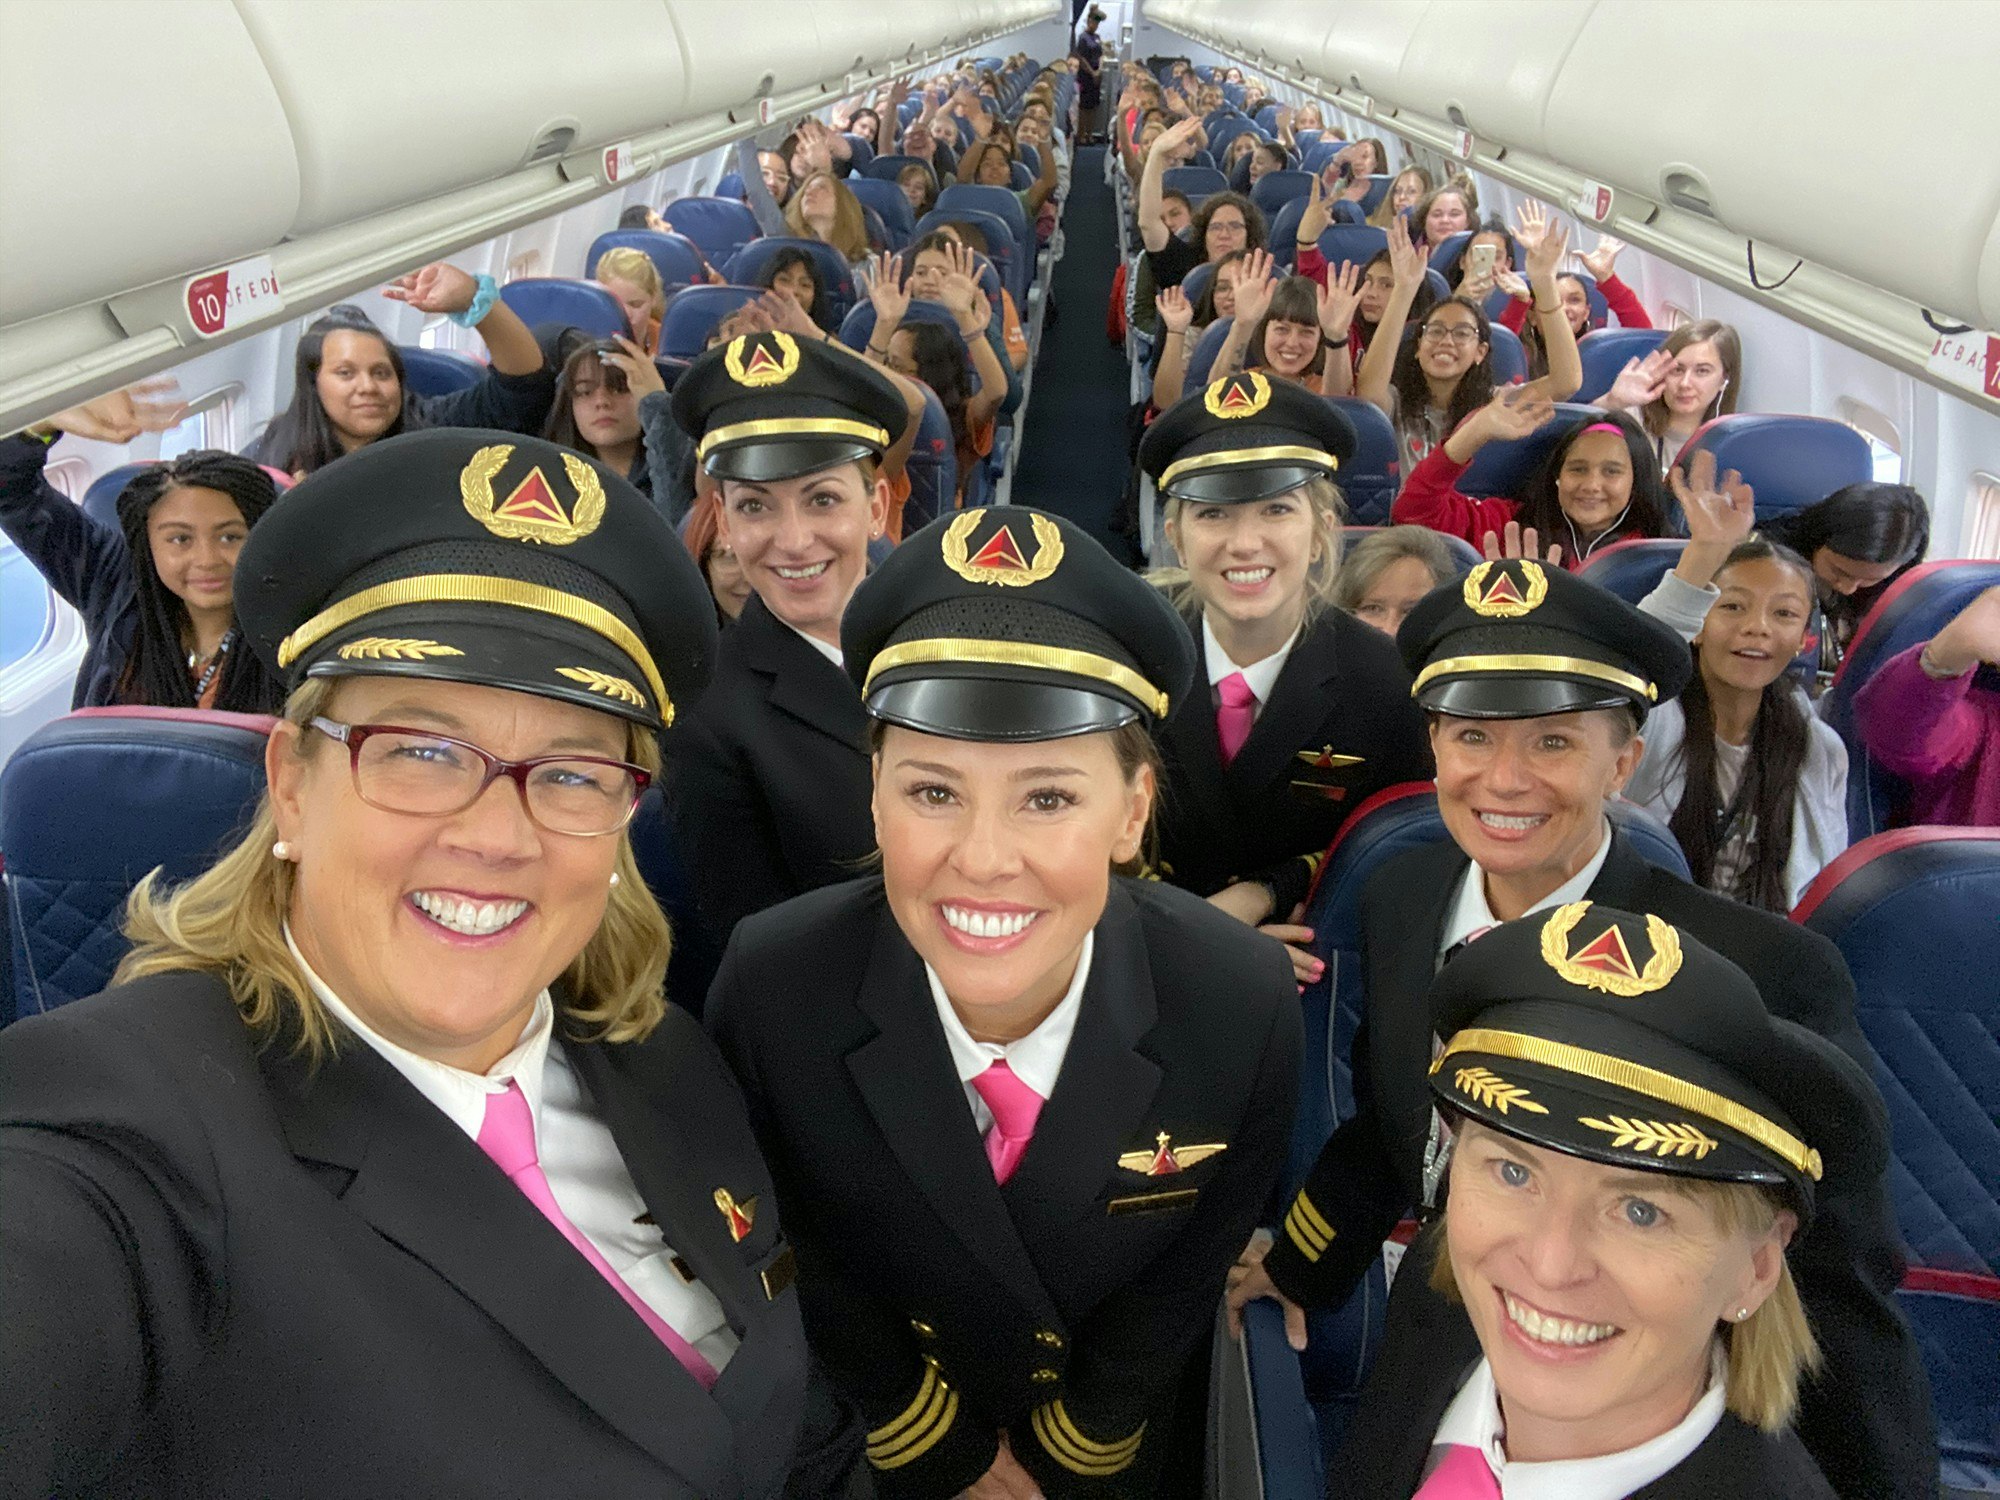 The all-female crew and passengers on board Delta's flight from Salt Lake City to NASA